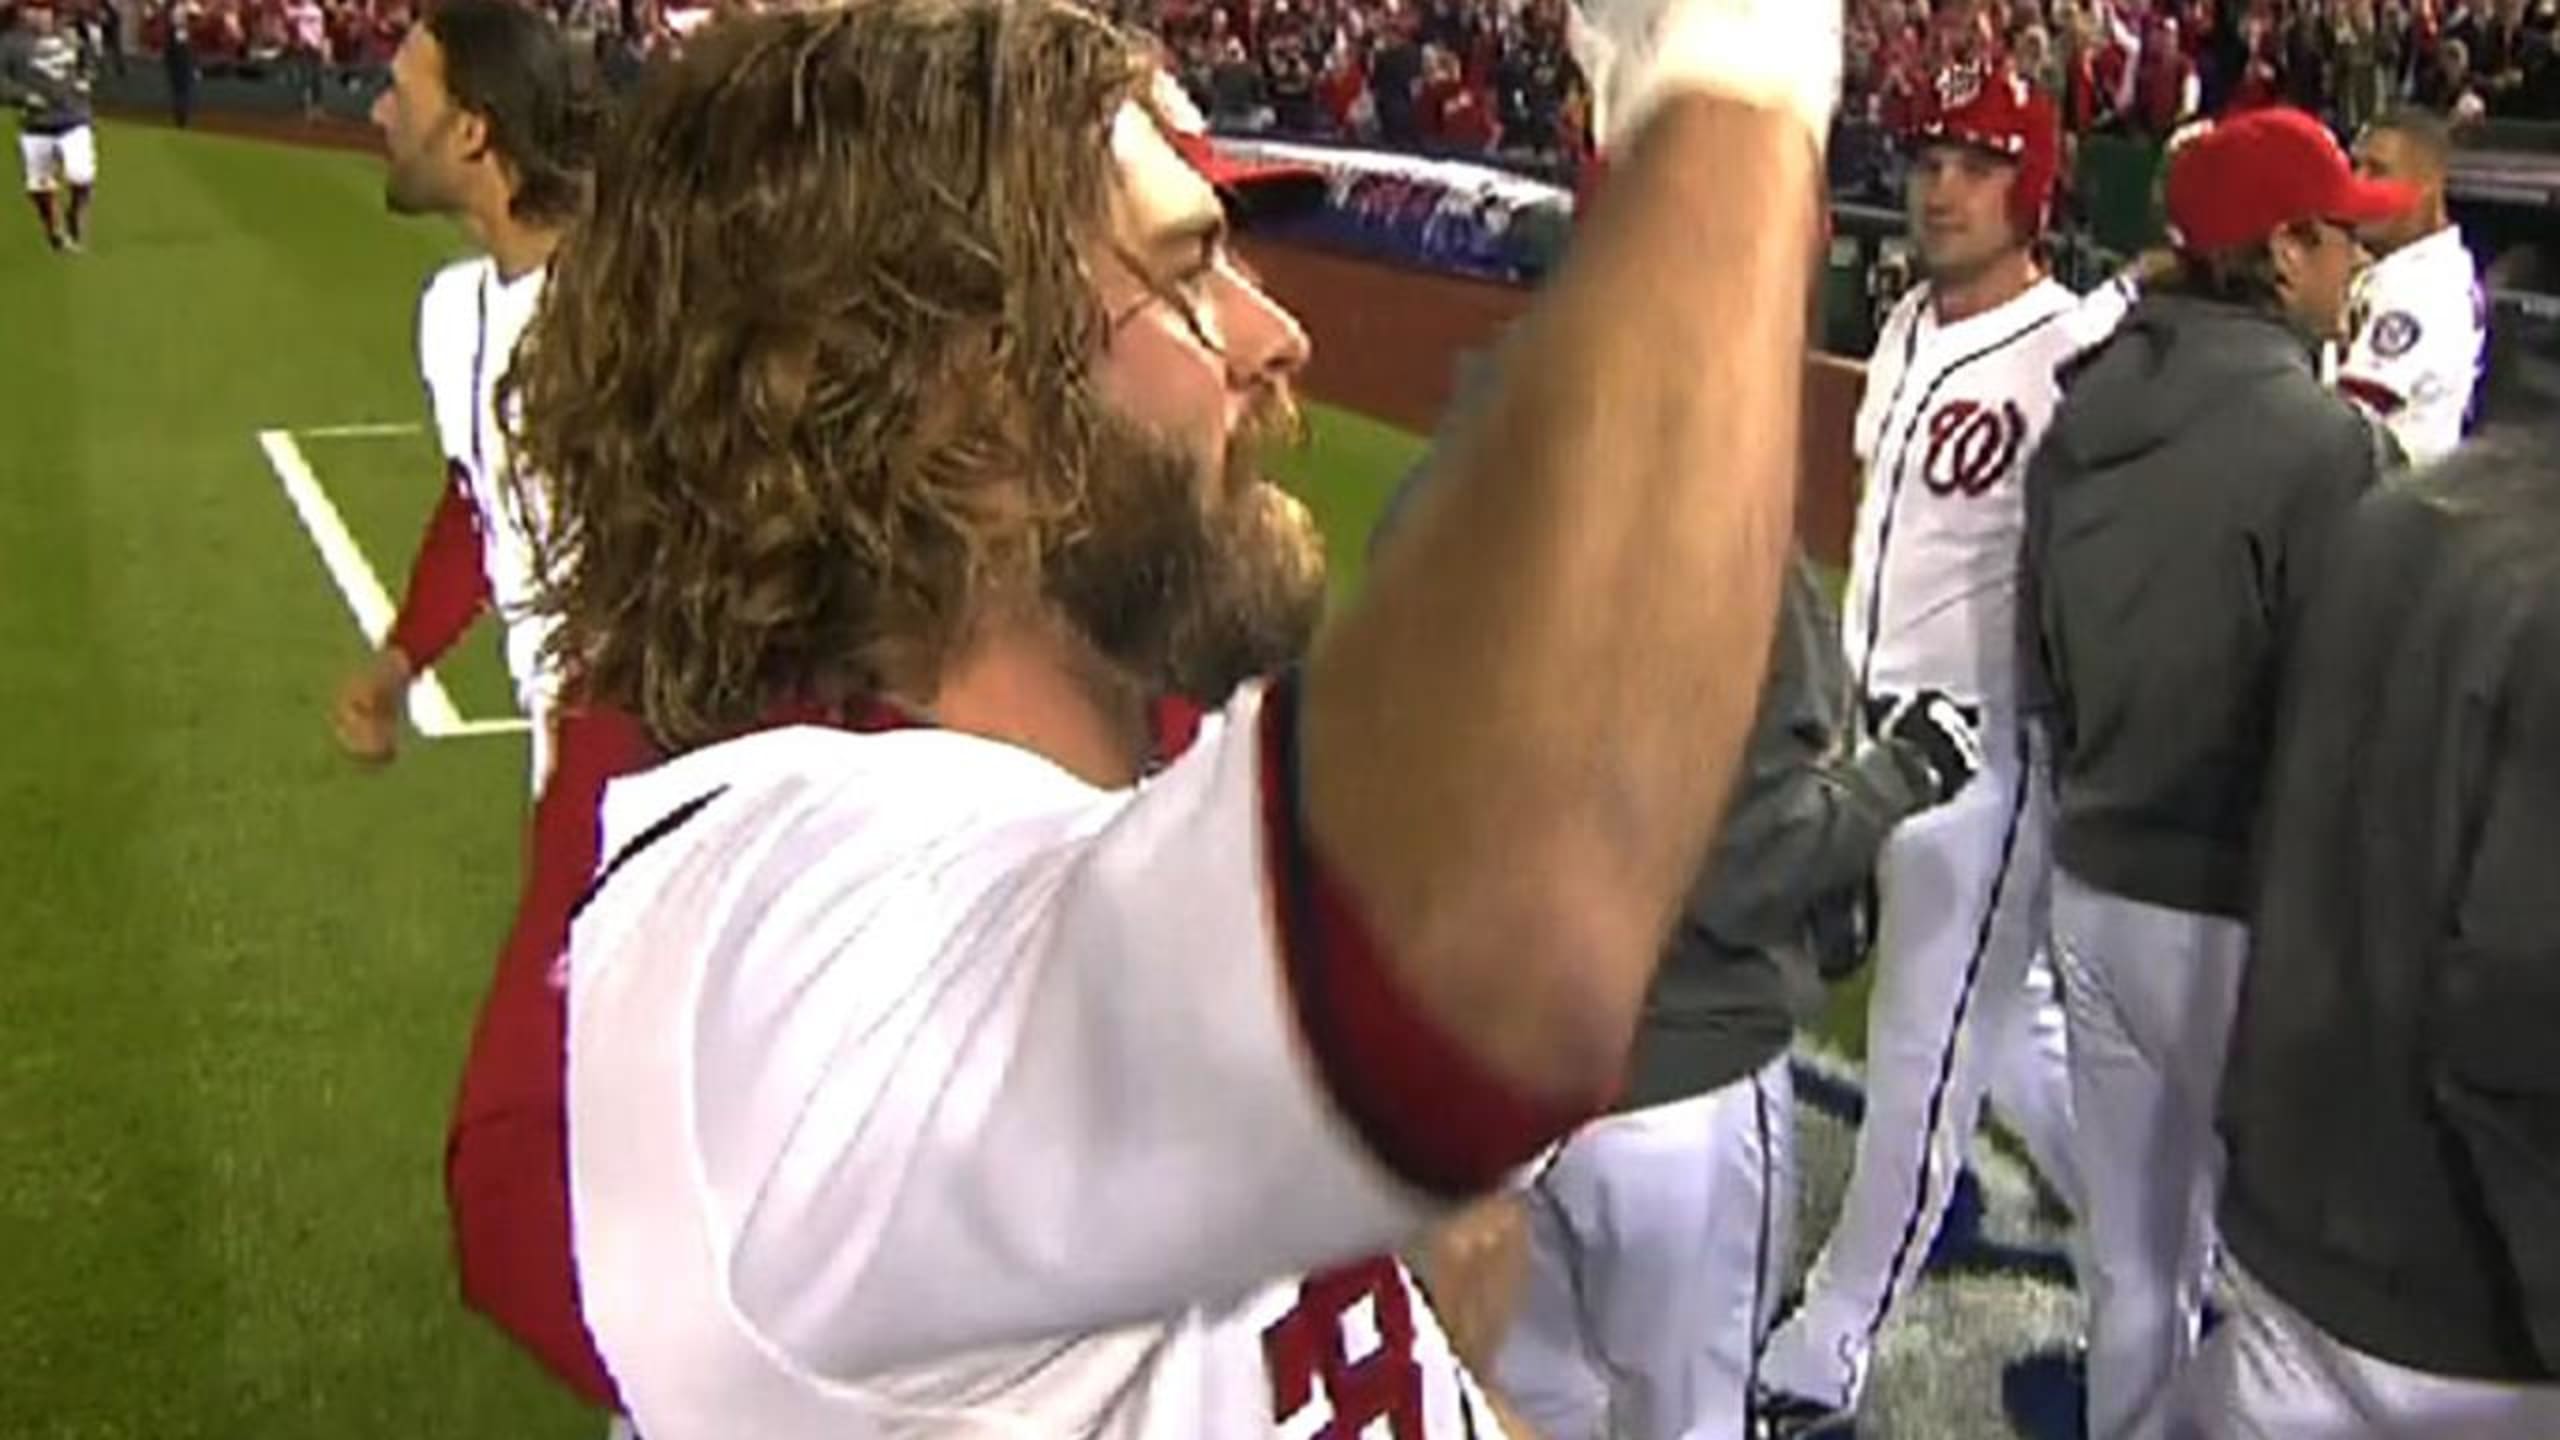 Nationals' Jayson Werth has two fractures in left wrist - Amazin